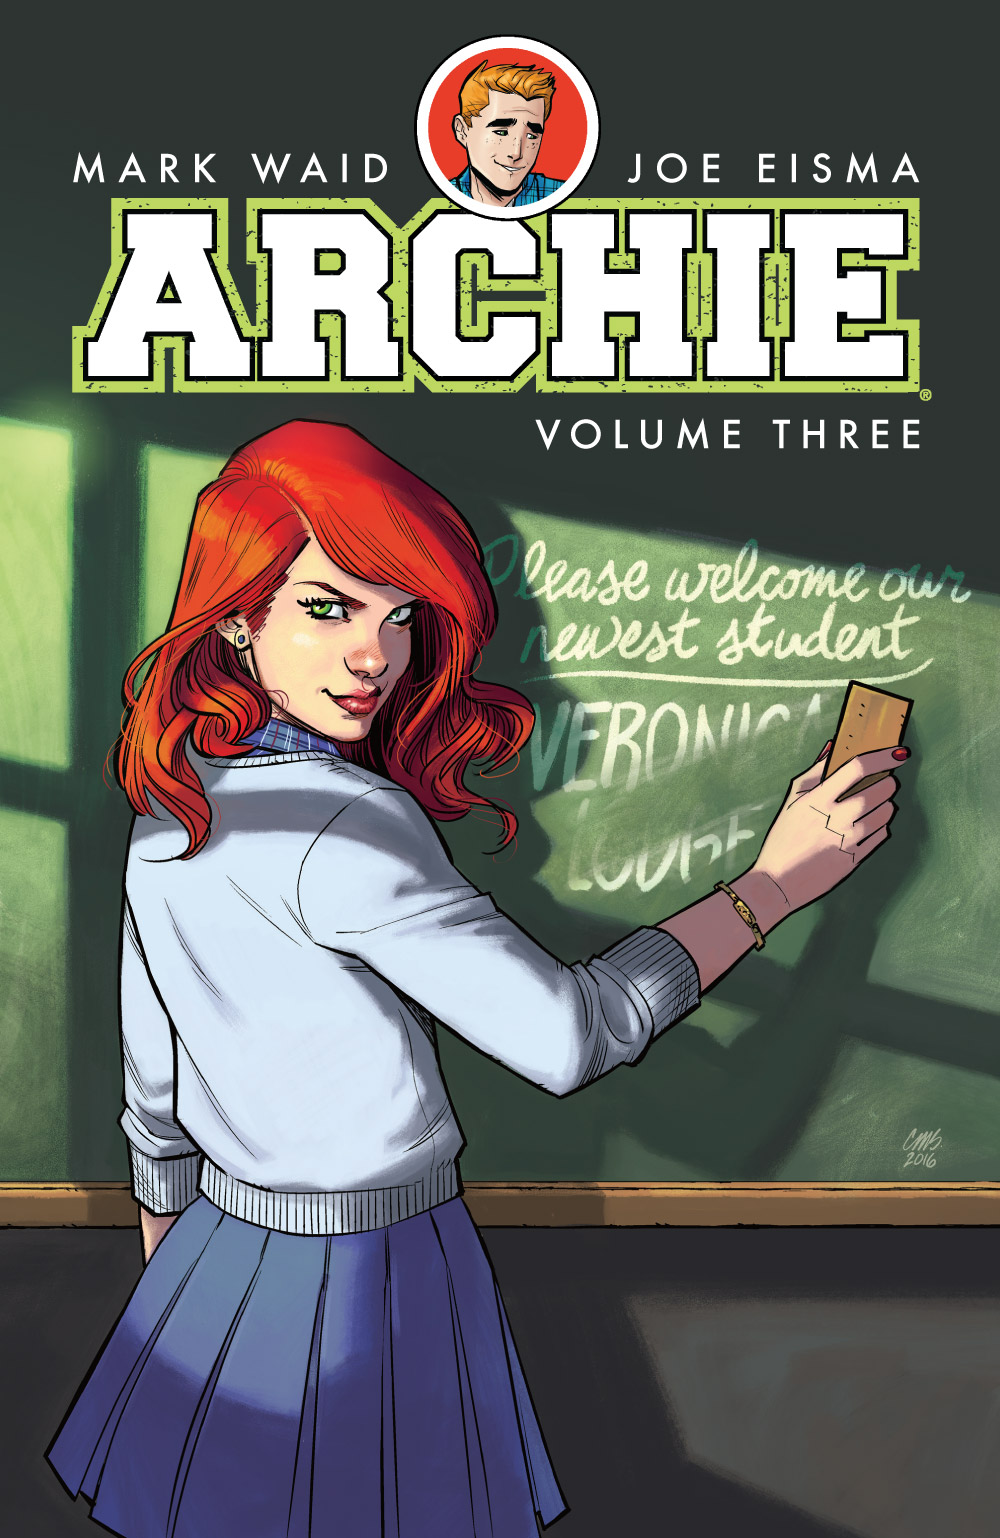 Preview the new Archie Comics on sale 4/26/17, including ARCHIE VOL 3